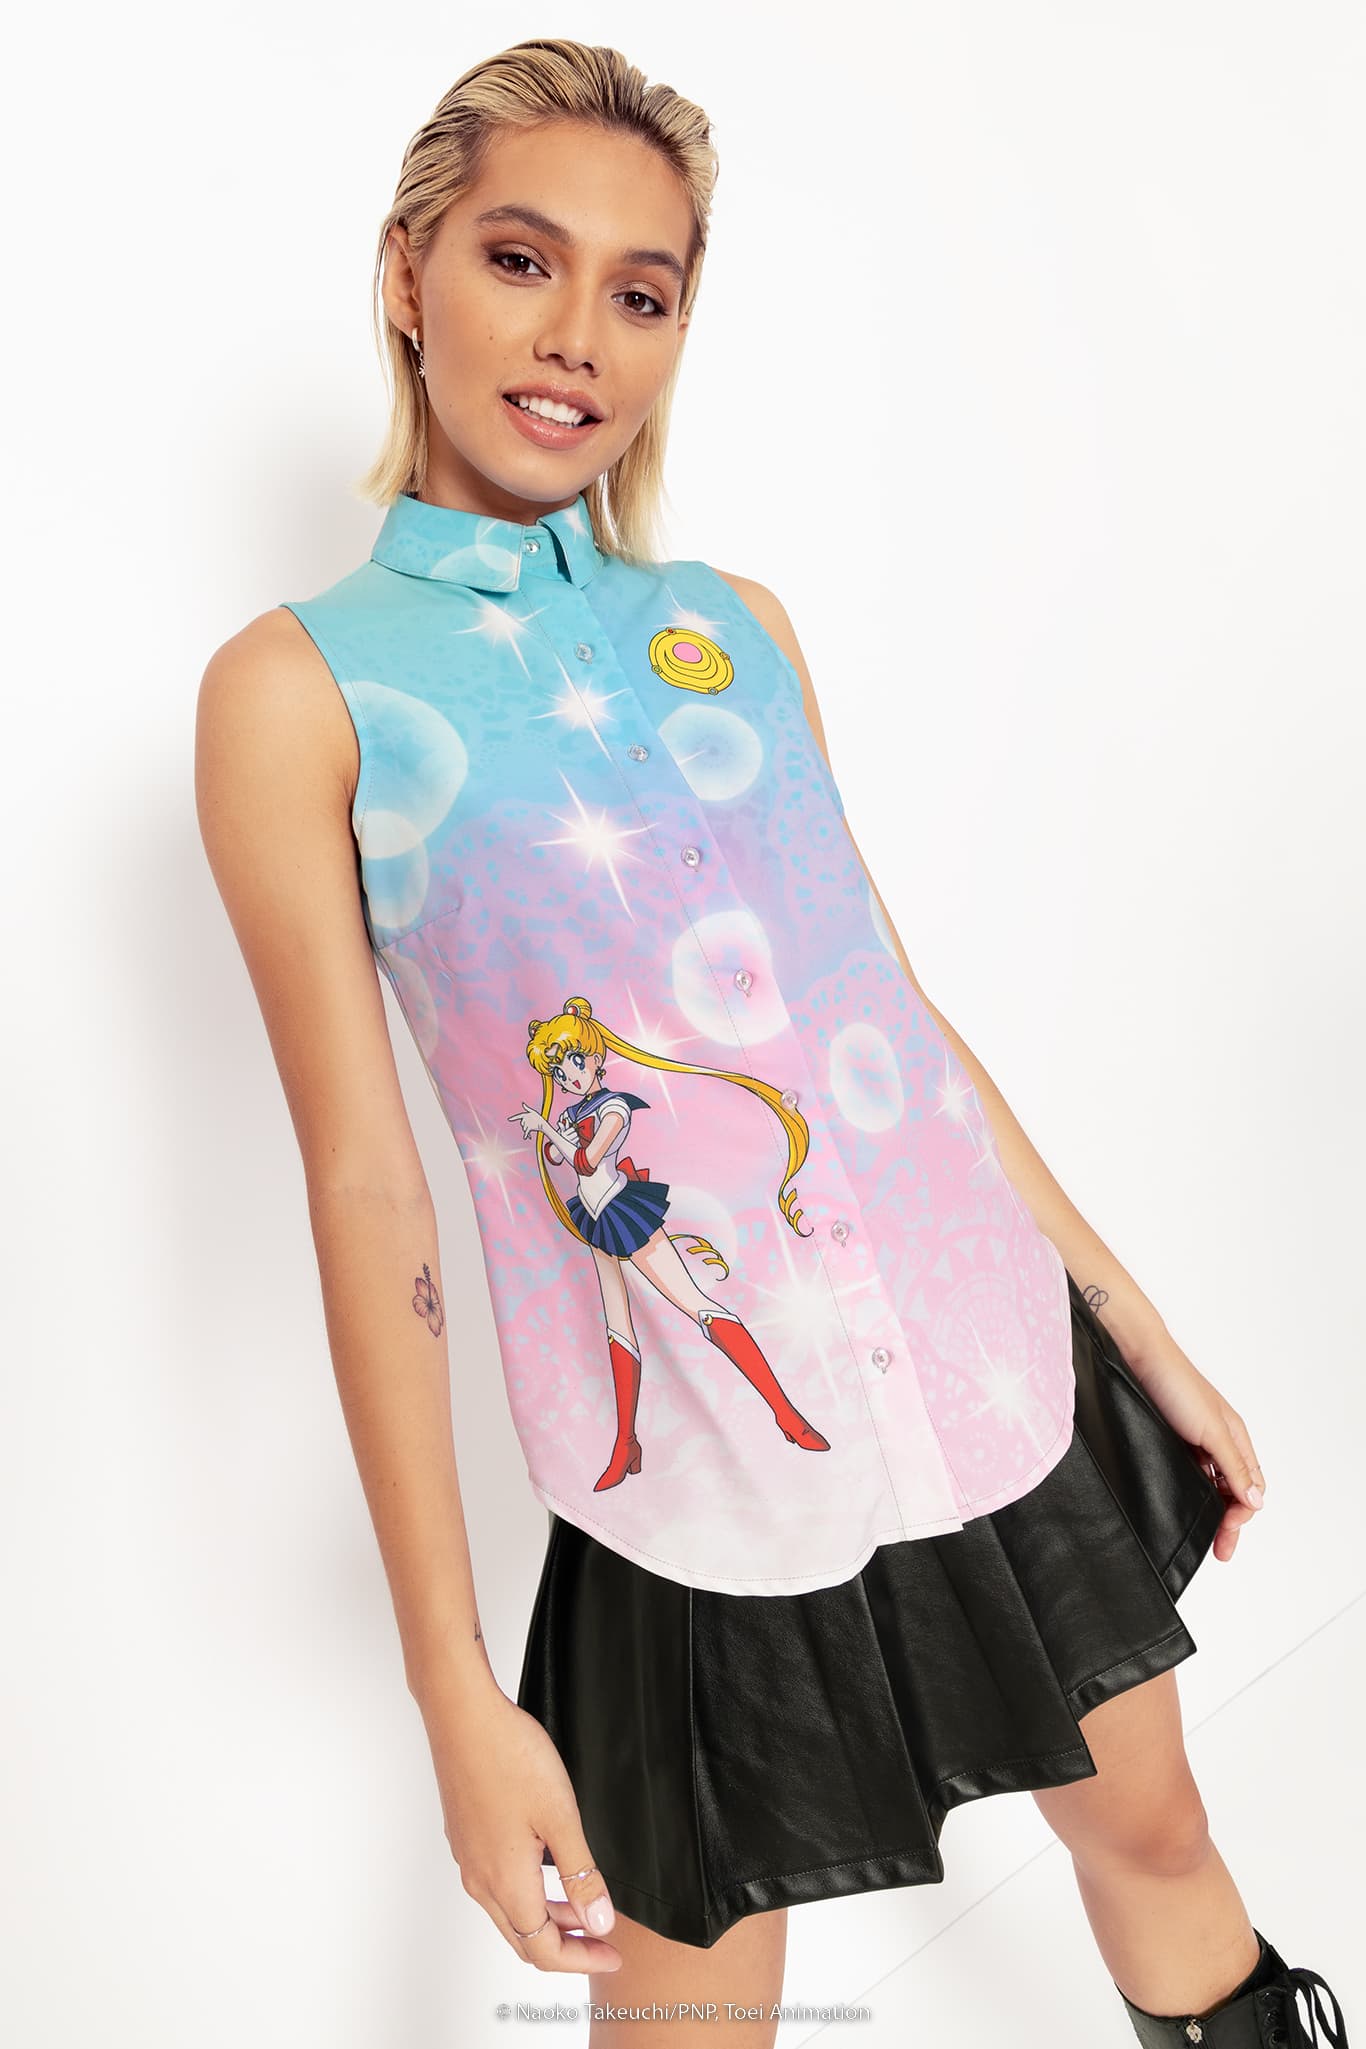 BlackMilk Clothing on X: Pretty Guardian Sailor Moon X BlackMilk is  coming! 🌙✨ Yep - it's really happening! Tag someone who NEEDS to know!  Pretty Guardian Sailor Moon x BlackMilk drops 7am